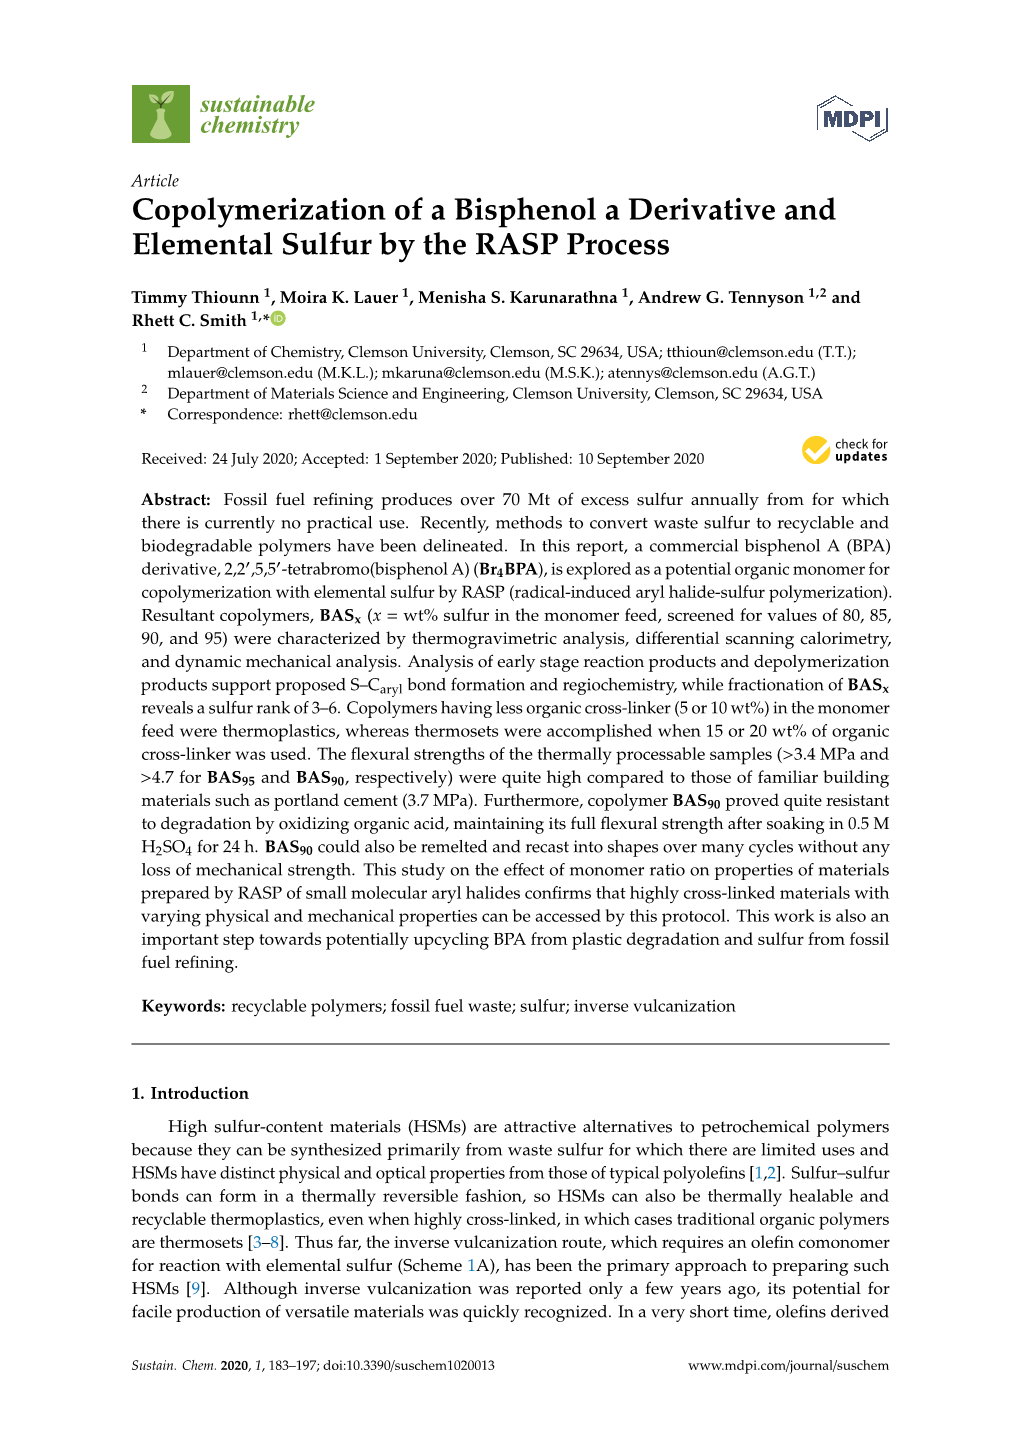 Copolymerization of a Bisphenol a Derivative and Elemental Sulfur by the RASP Process